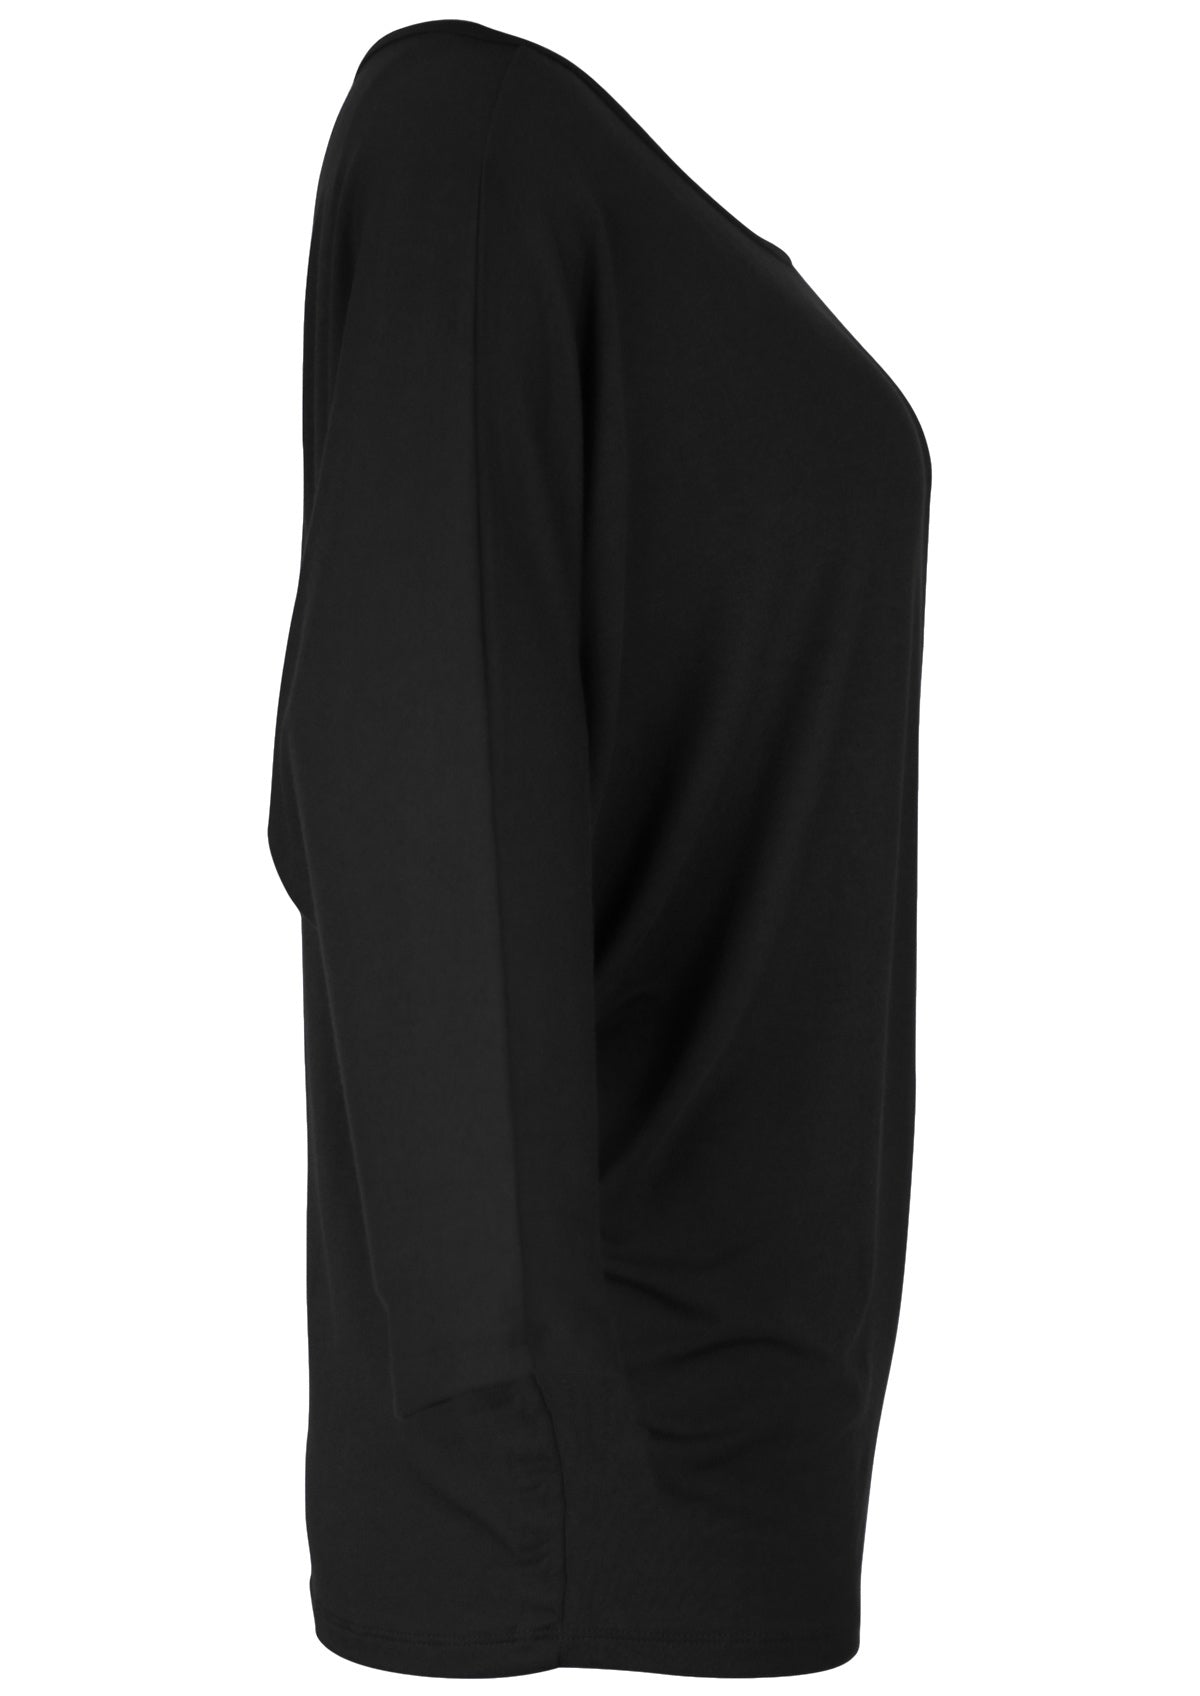 Side view of women's 3/4 sleeve rayon batwing v-neck black top.